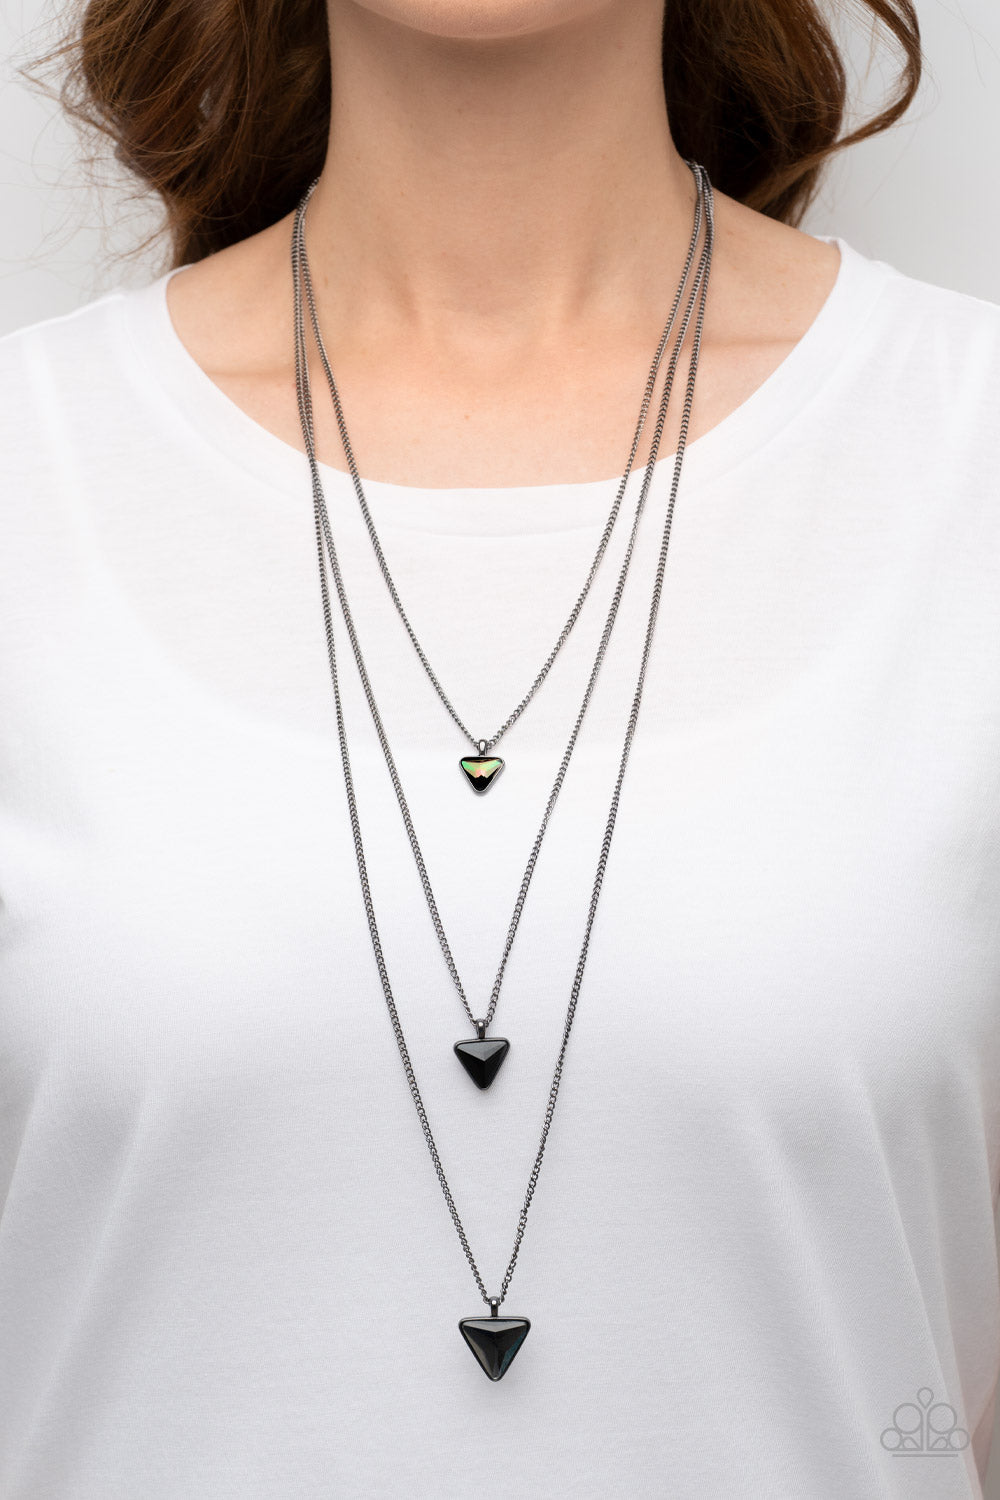 Paparazzi ♥ Follow the LUSTER - Black ♥ Necklace